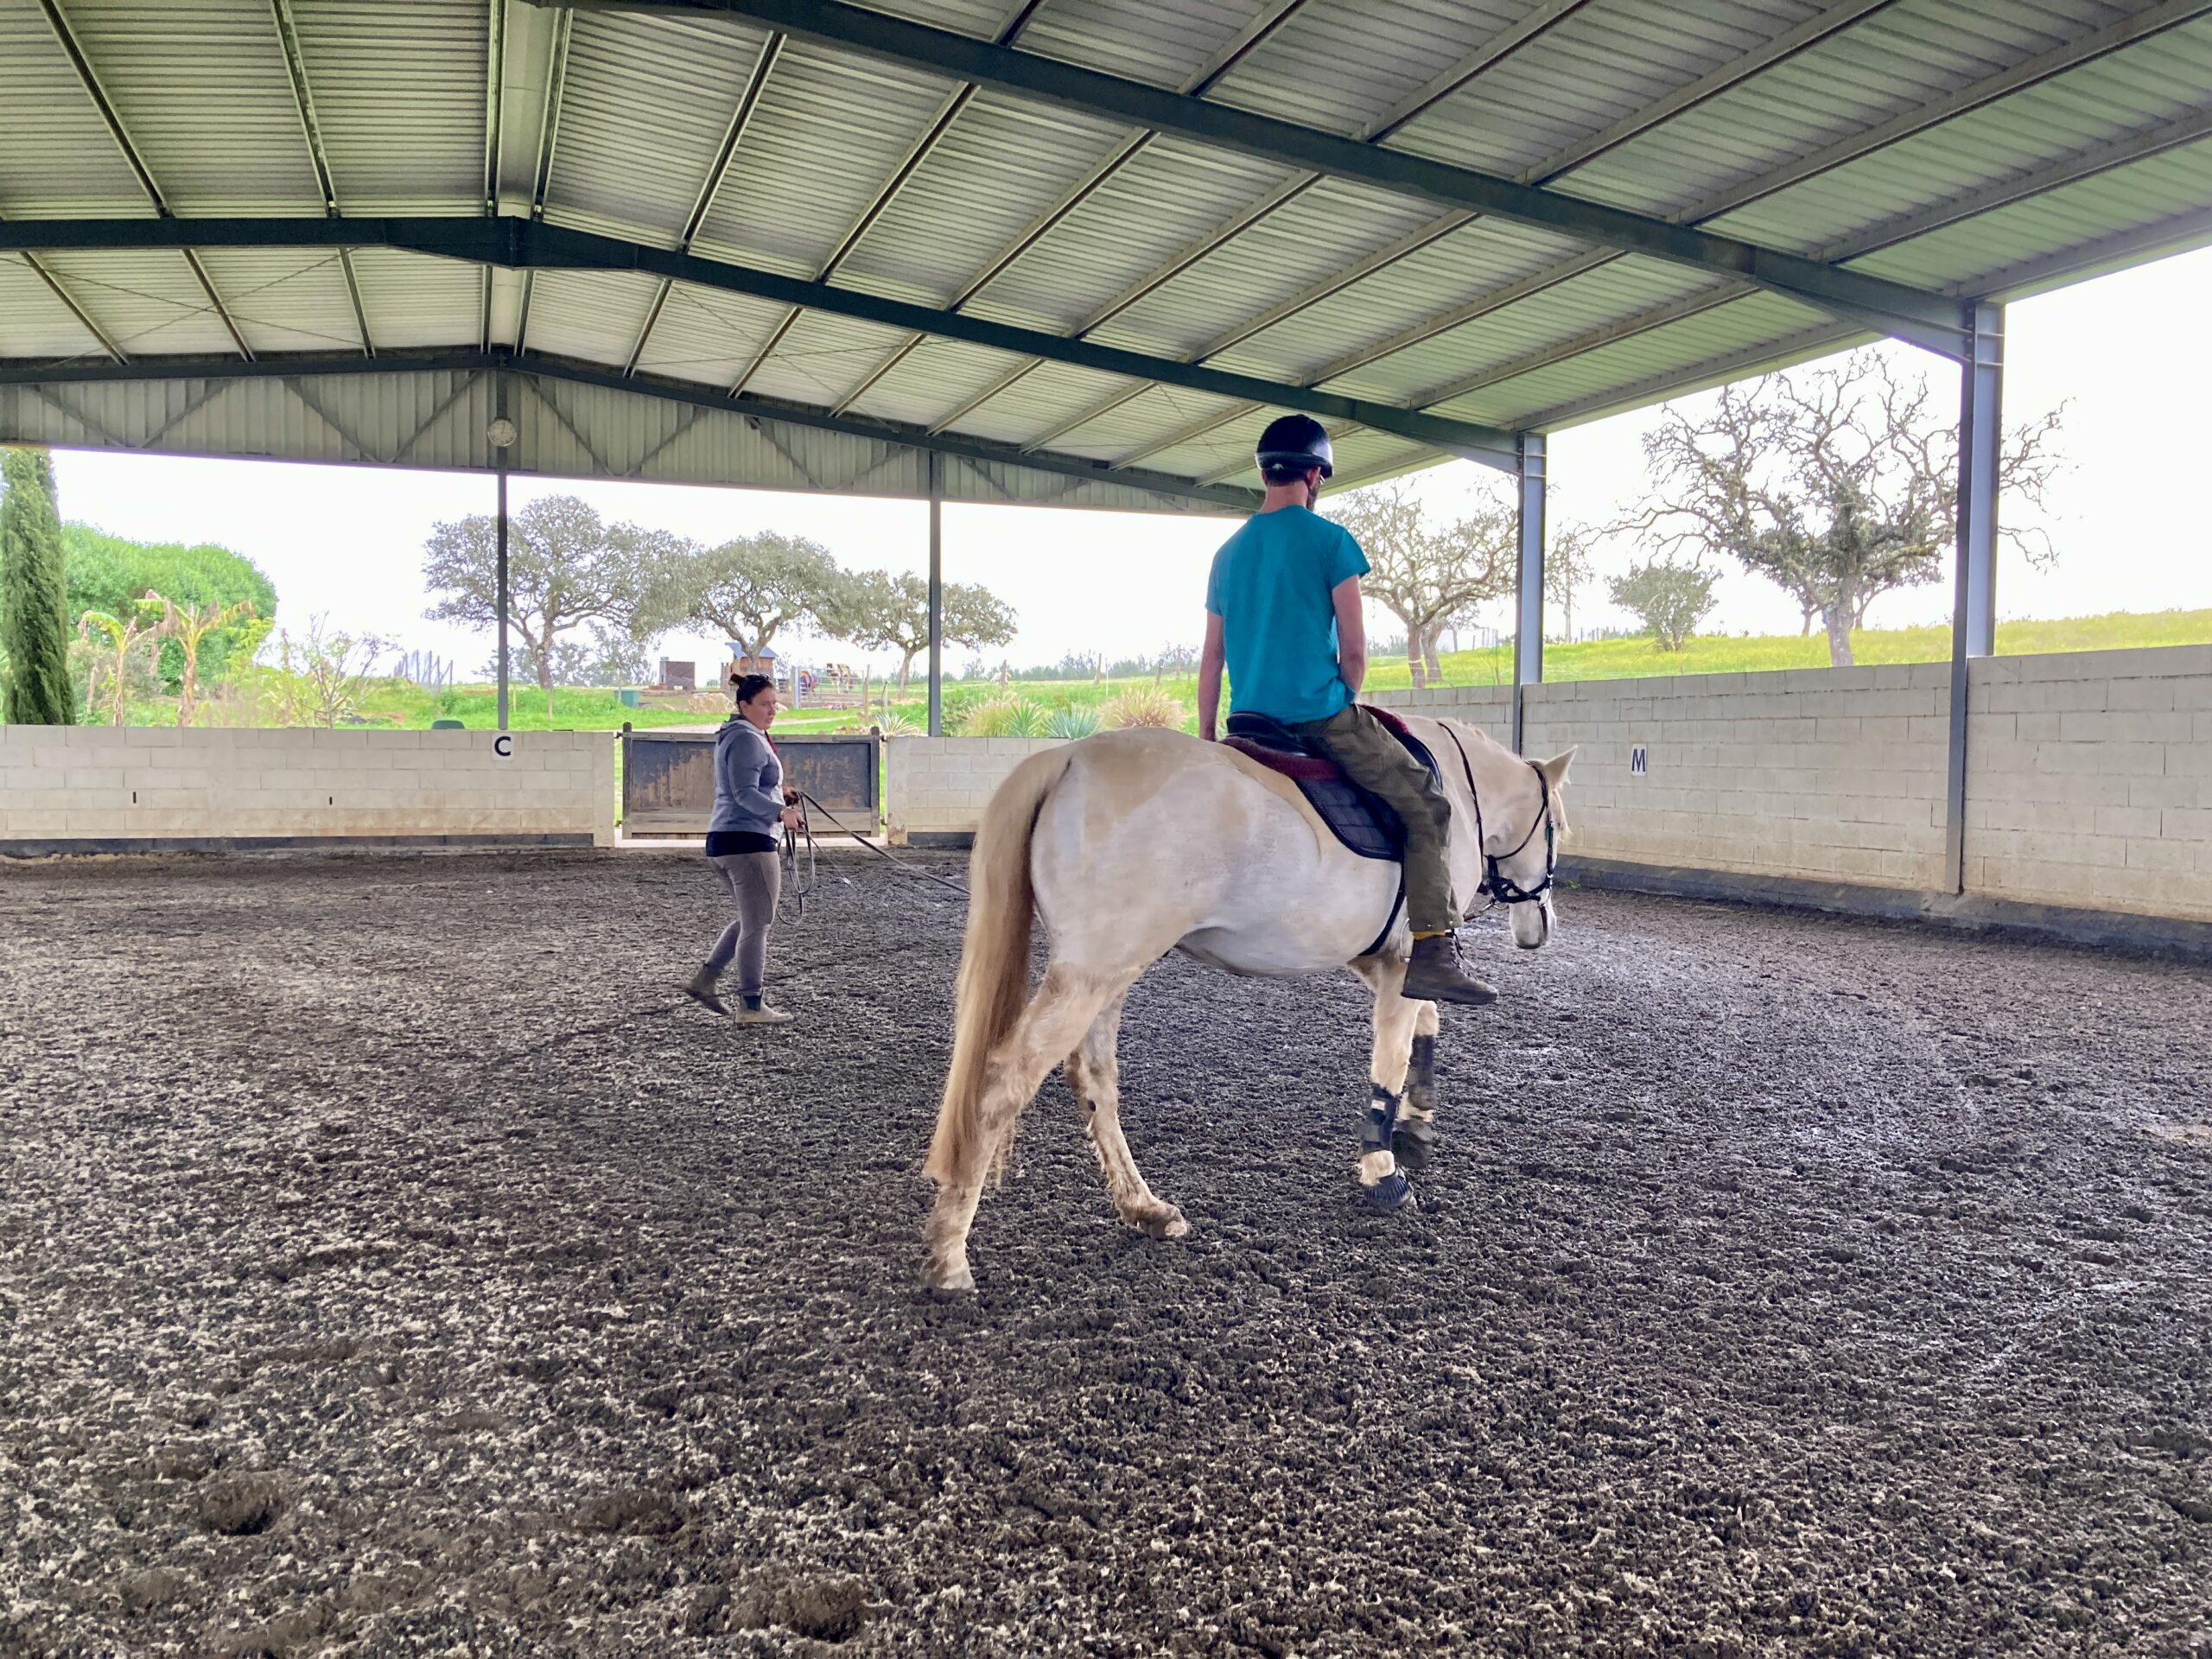 Riding lesson, man at the lunge on a white horse